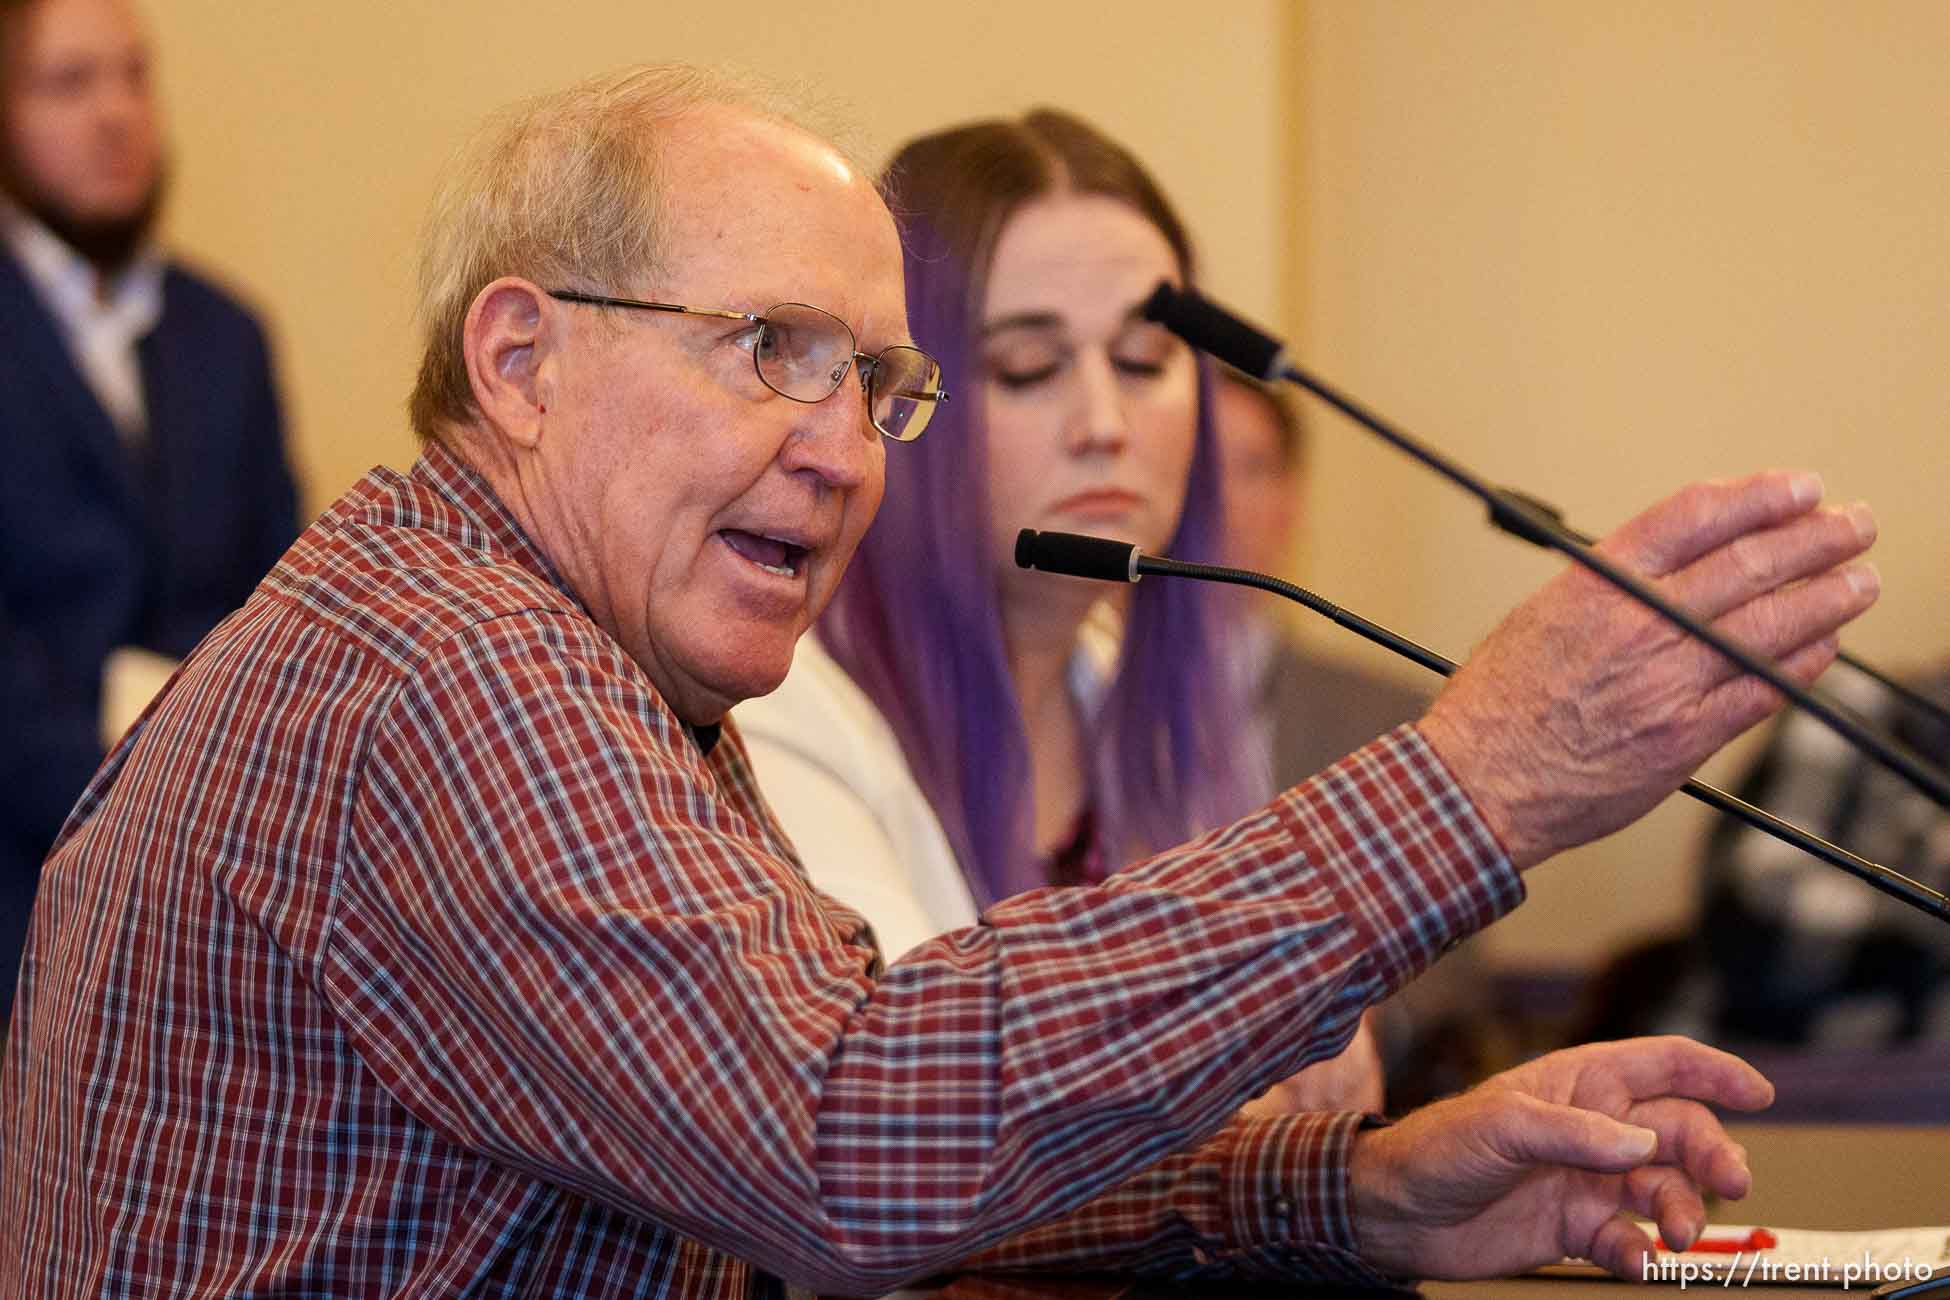 (Trent Nelson  |  The Salt Lake Tribune) A man speaks in favor of Rep. Kera Birkeland's bill to narrow Utah's legal definitions of sex to exclude transgender people (HB 257) at a meeting of the House Business and Labor Committee at the Utah Capitol in Salt Lake City on Wednesday, Jan. 17, 2024. At rear is Kayla Aitken, who spoke against the bill.